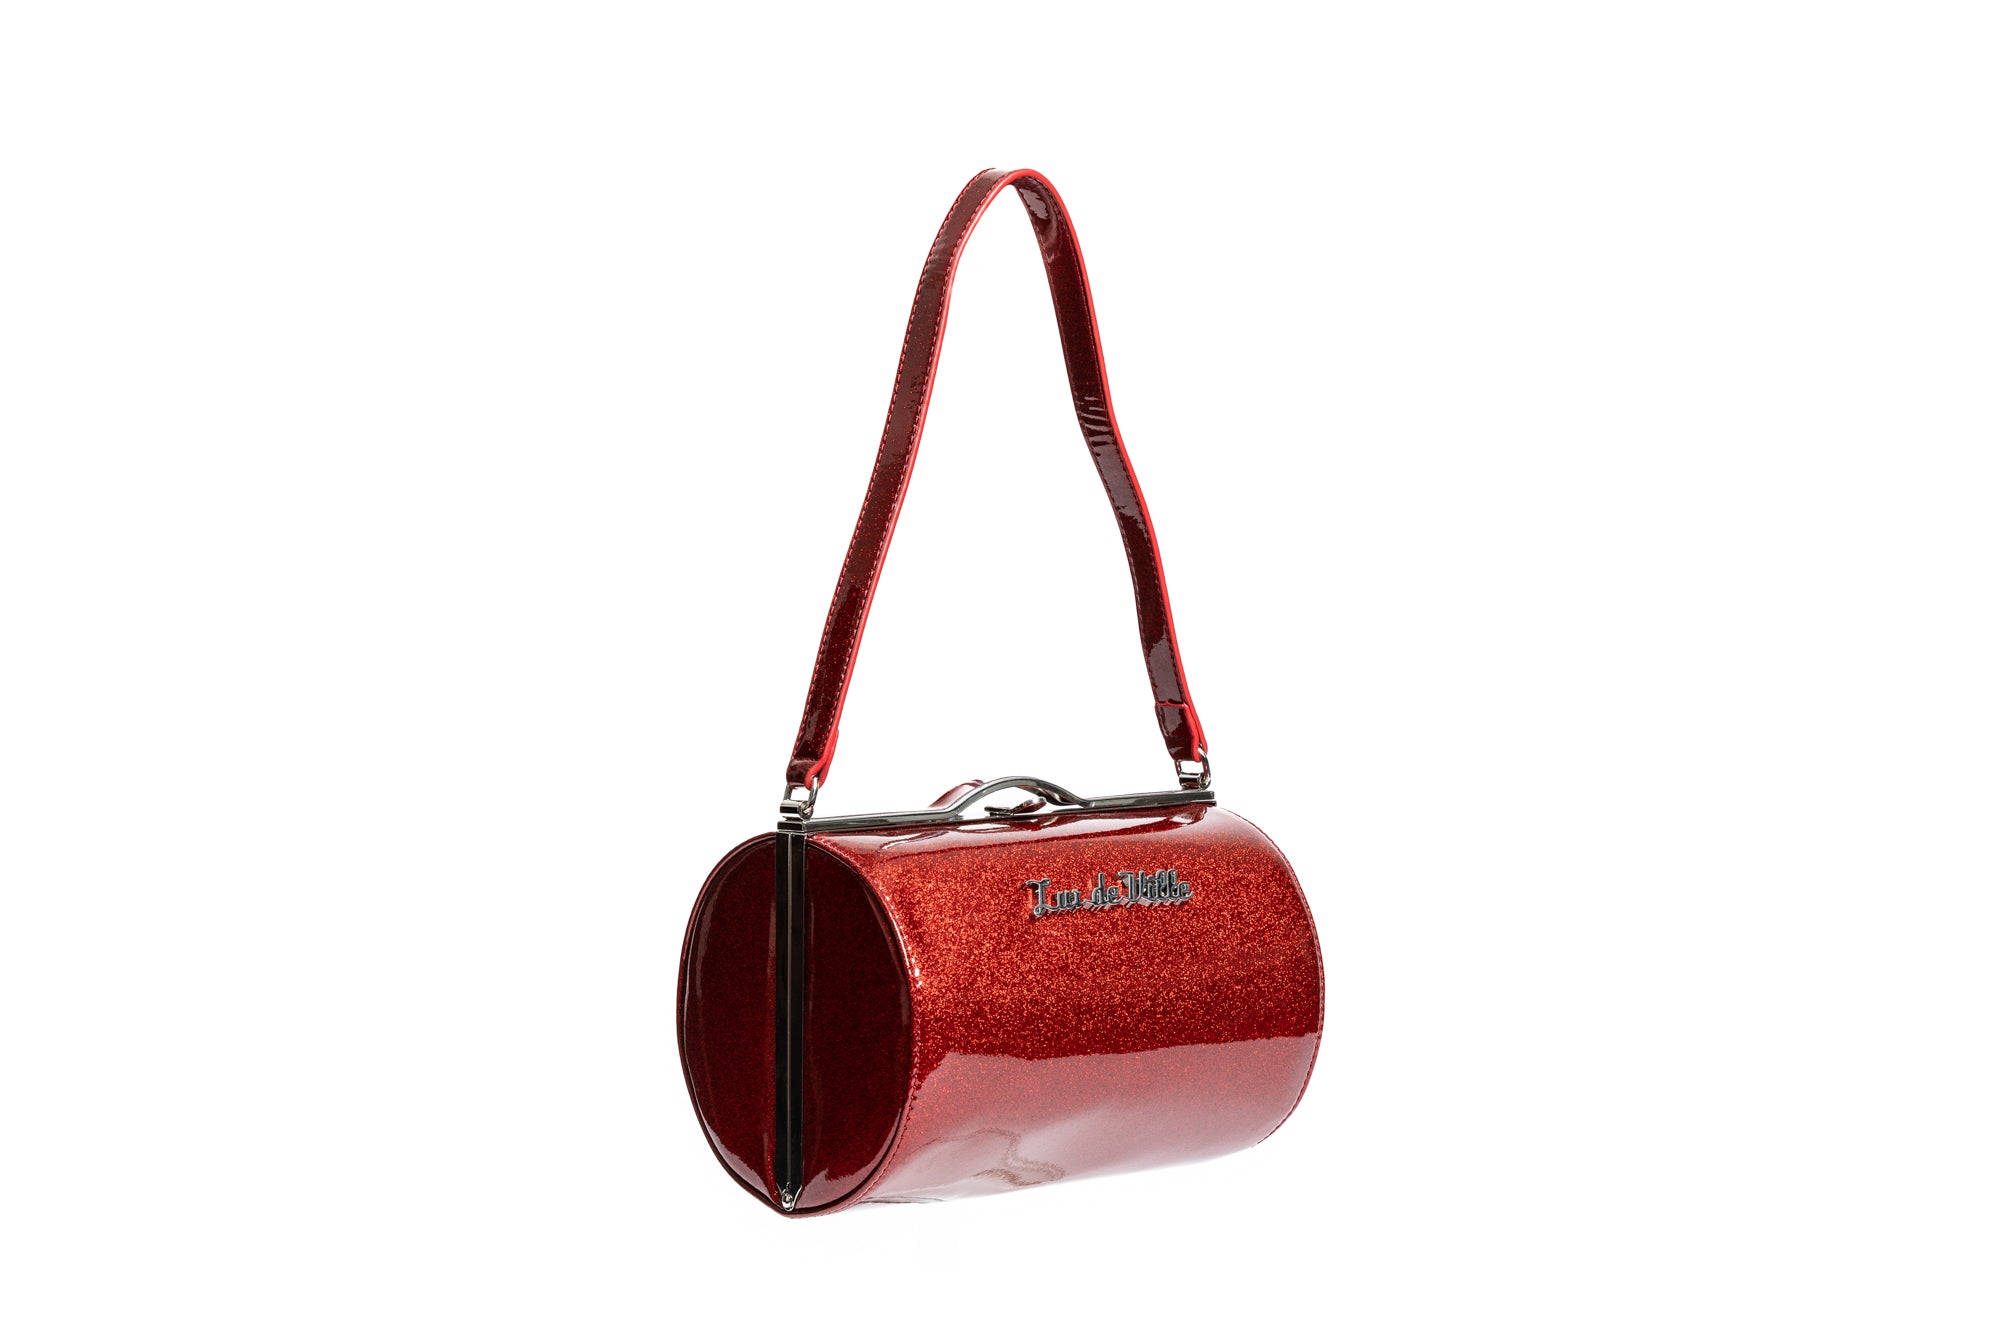 Lux de Ville Red Purse - $27 (76% Off Retail) - From Gracie